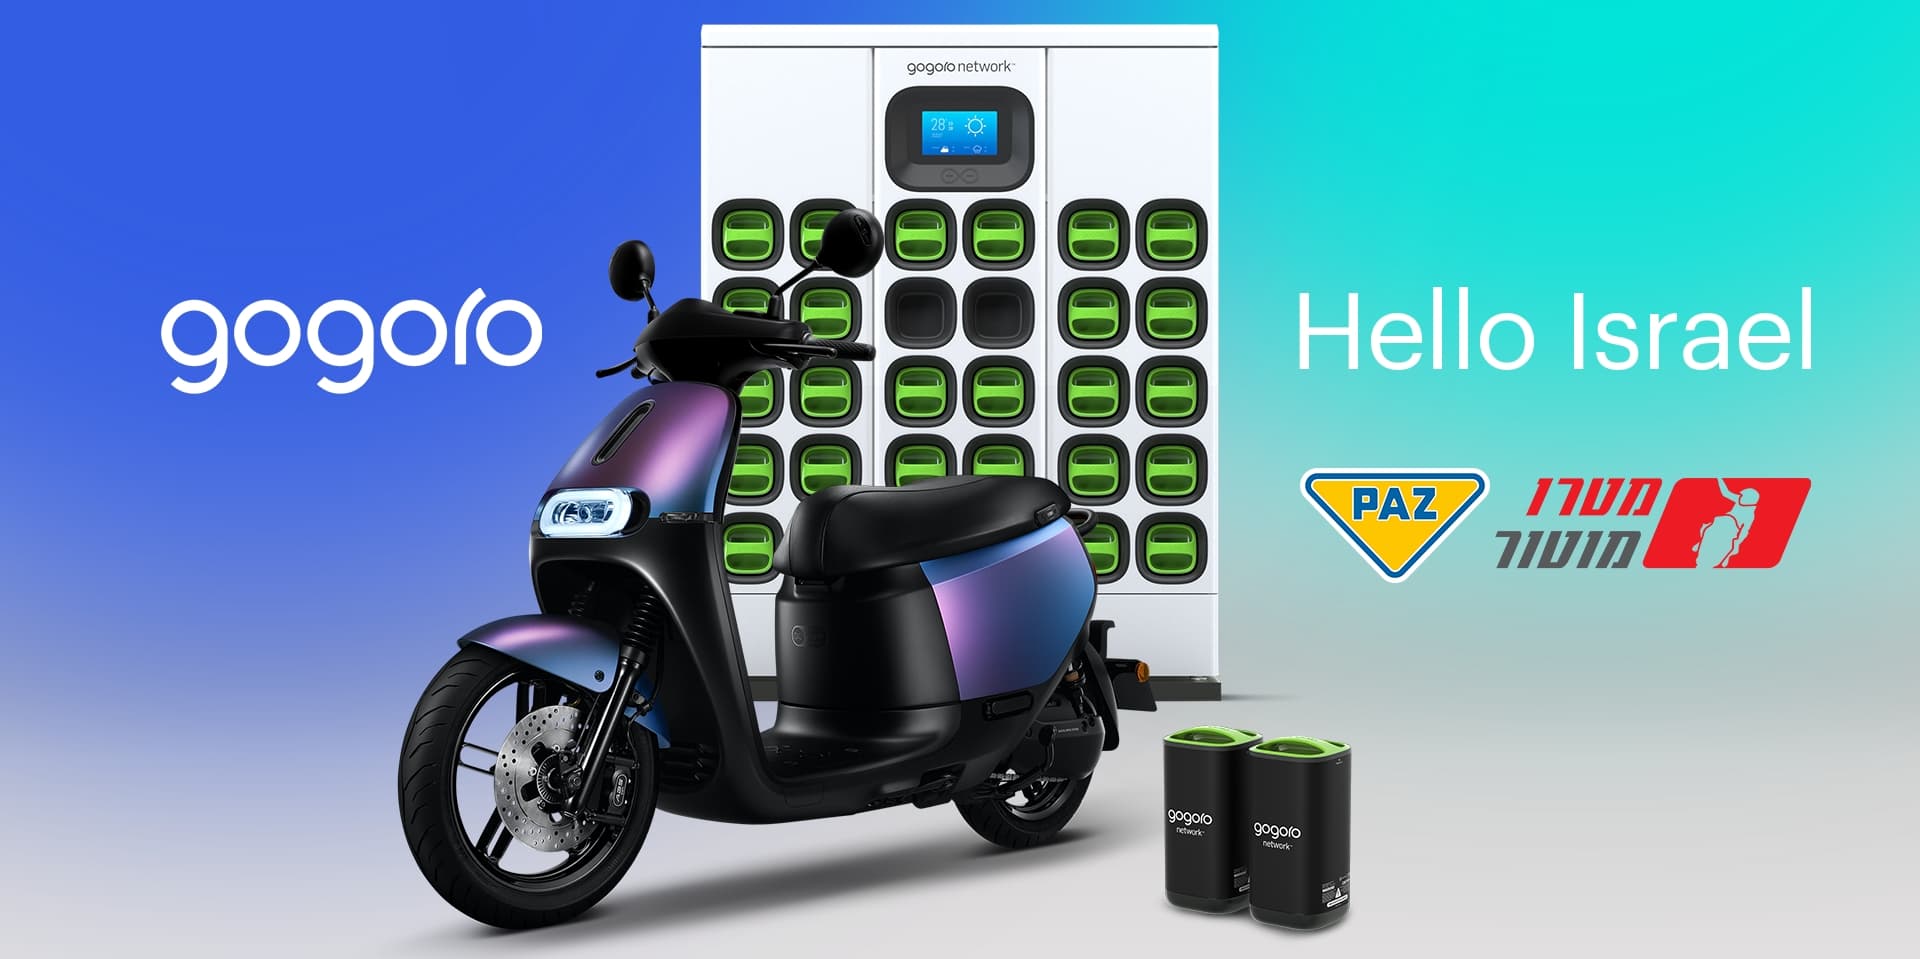 Gogoro westward expansion, bringing electric scooters to Israel